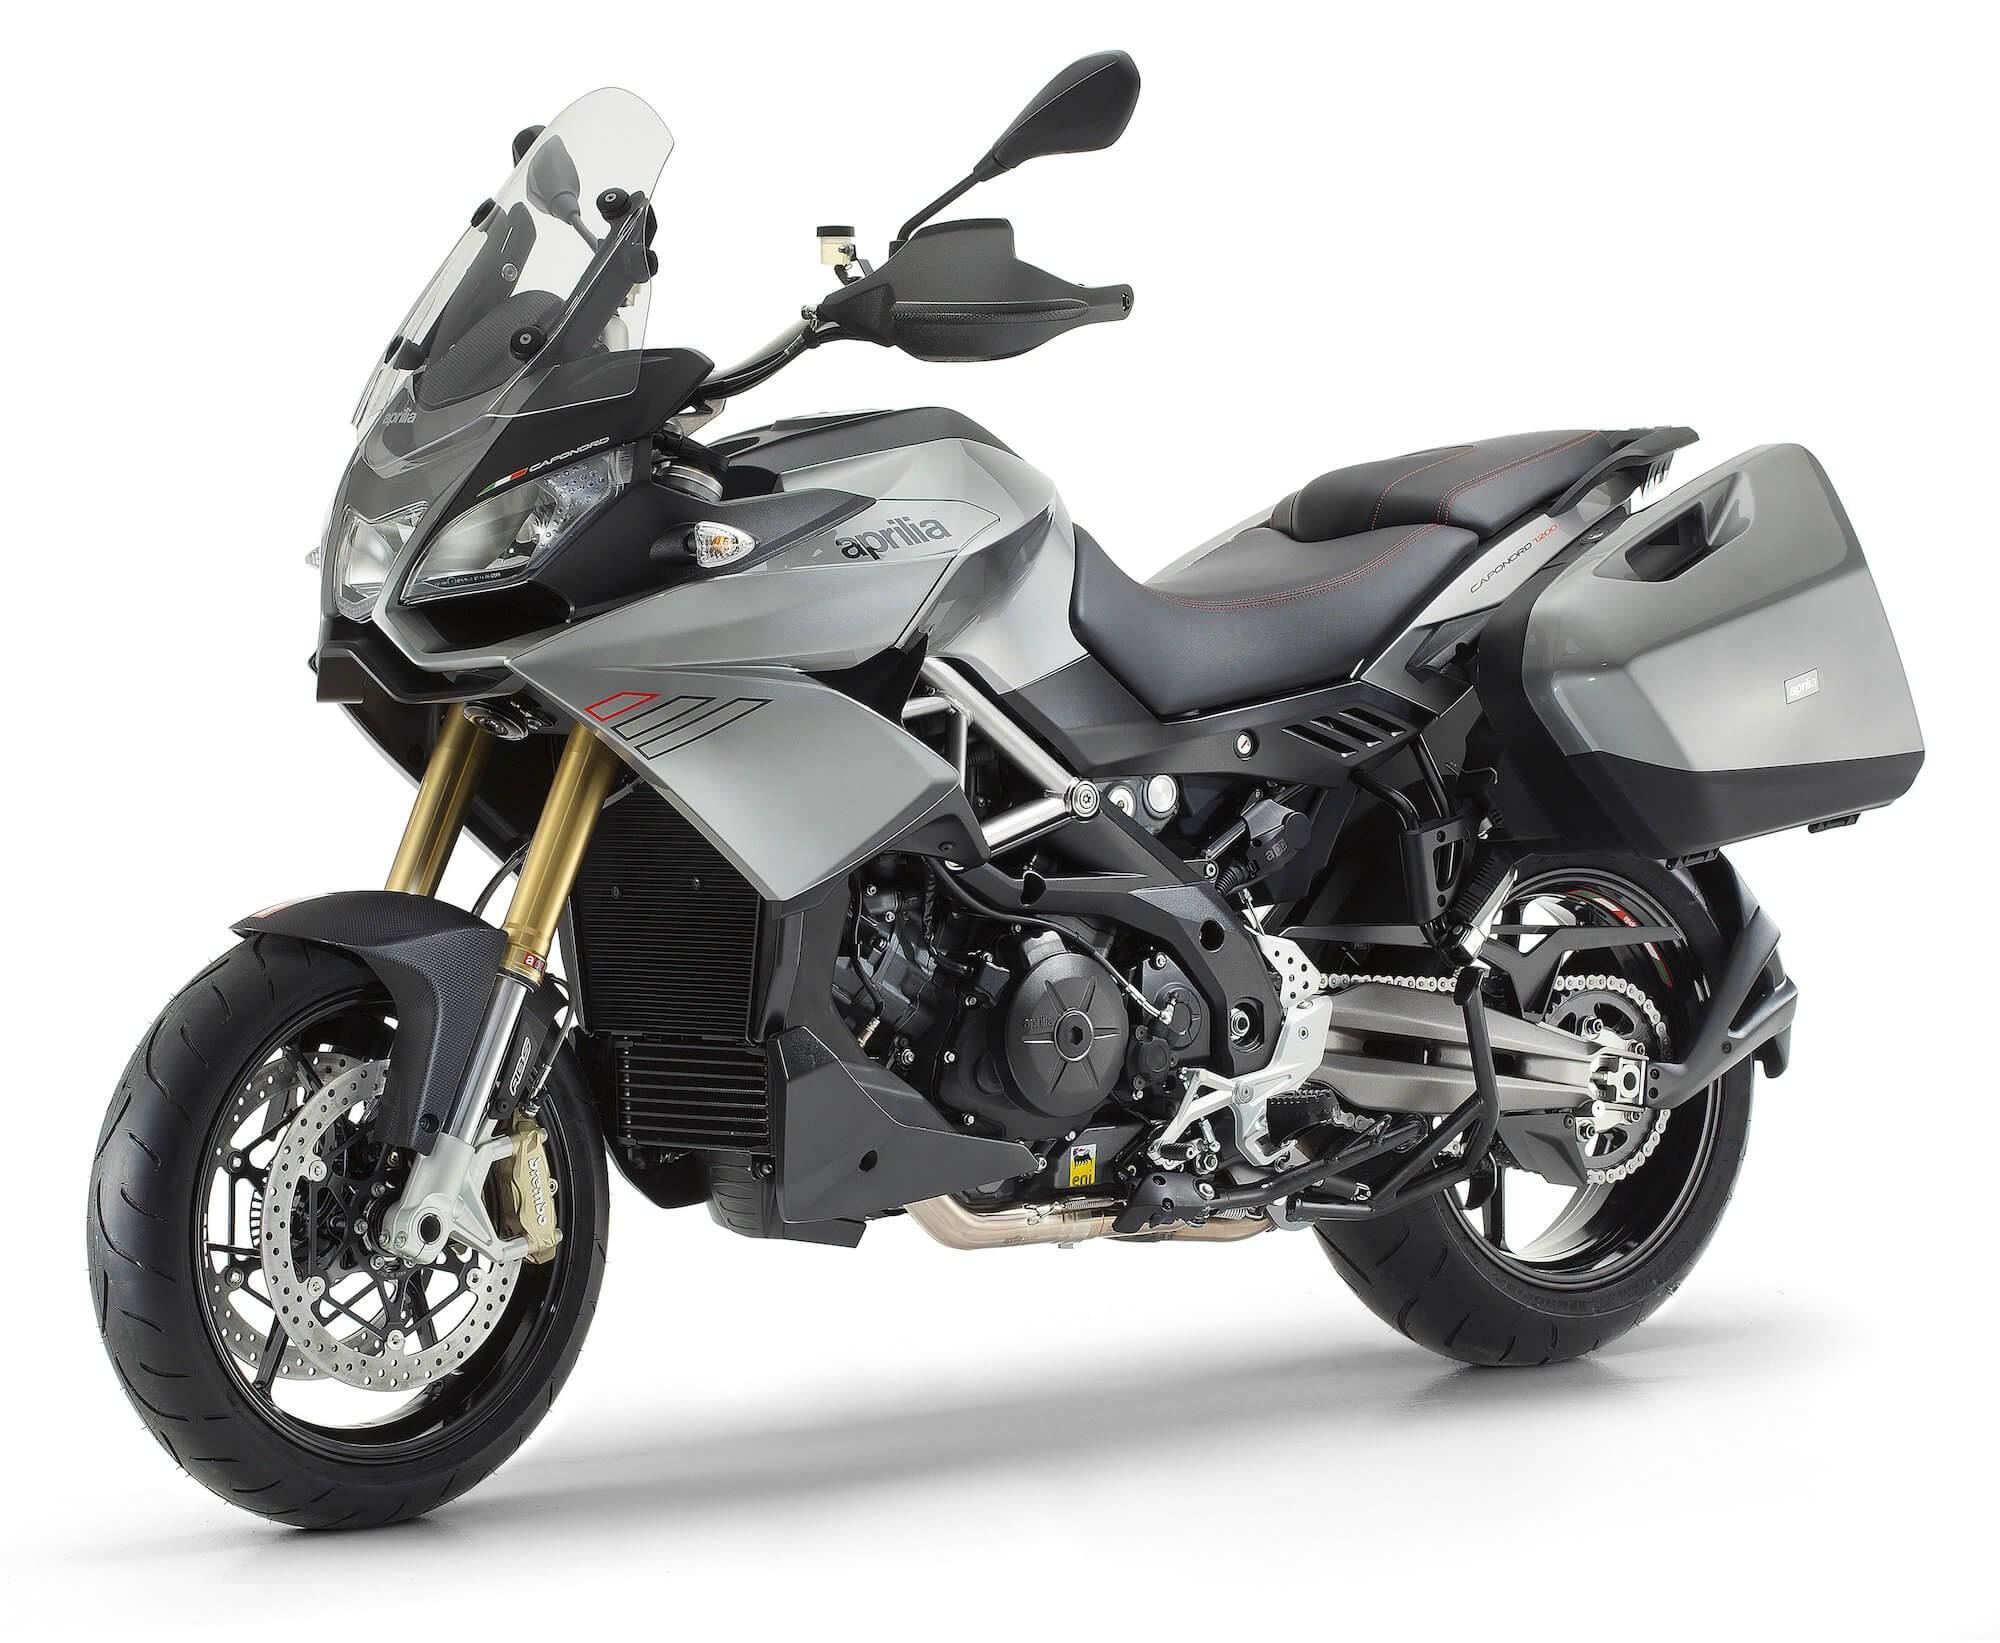 Aprilia caponord 1200 (2013-on) review, specs & prices | mcn